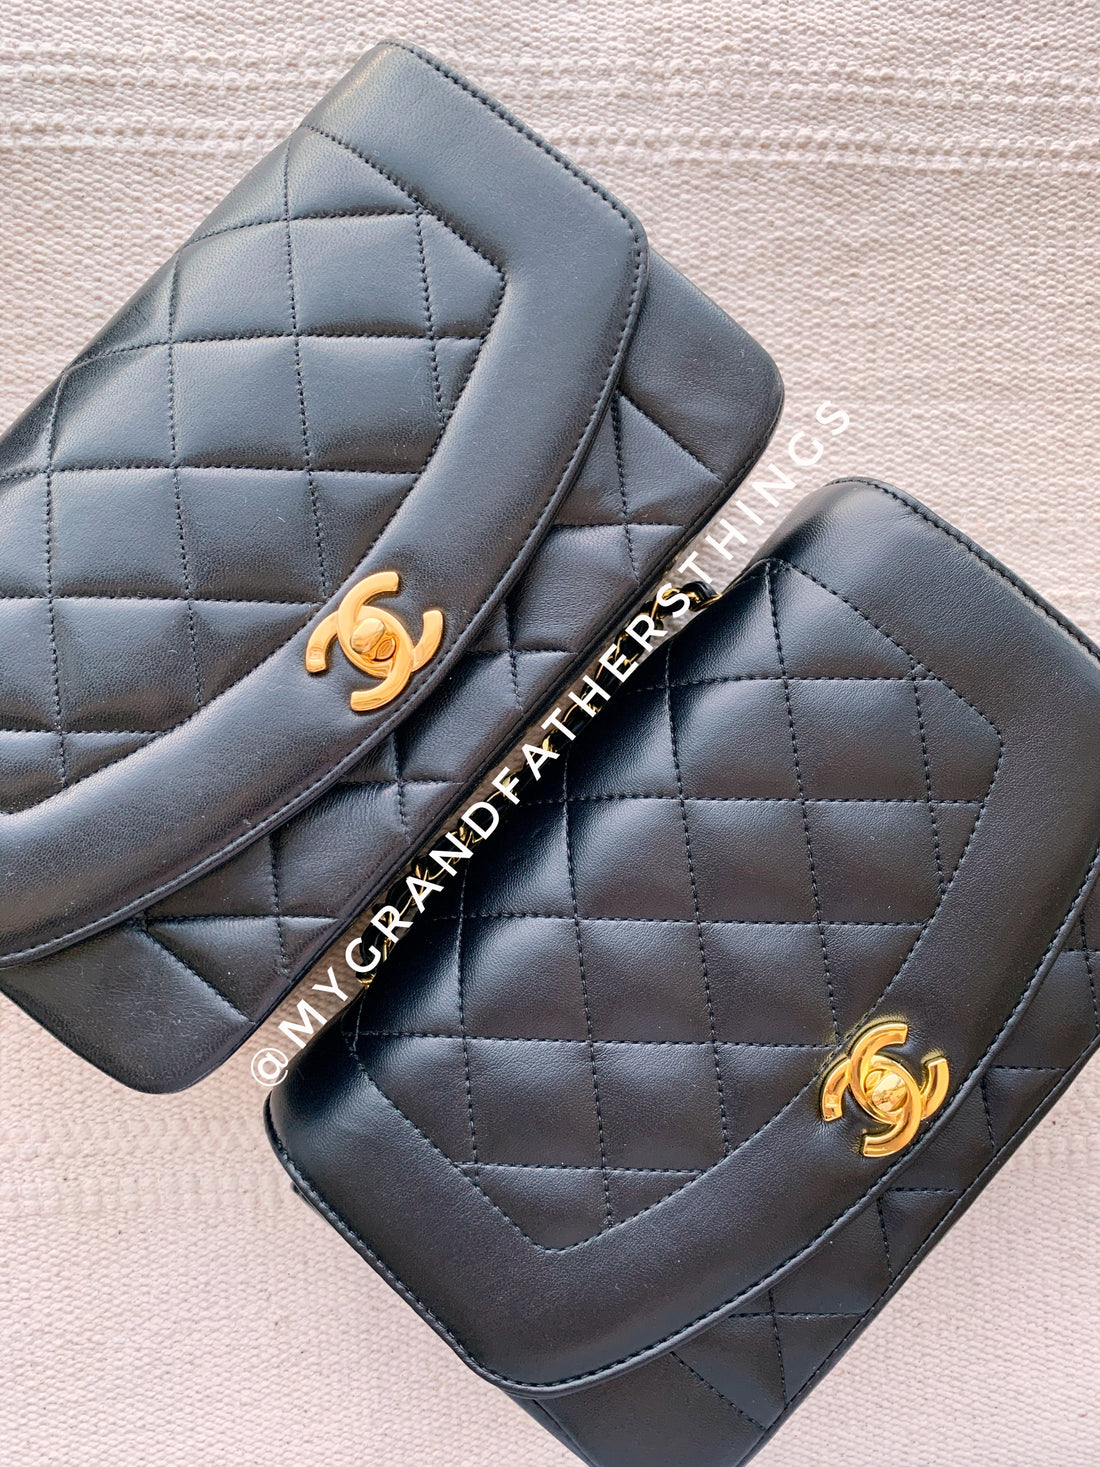 Chanel authentication - Mini Bag. Any help is appreciated! : r/chanel